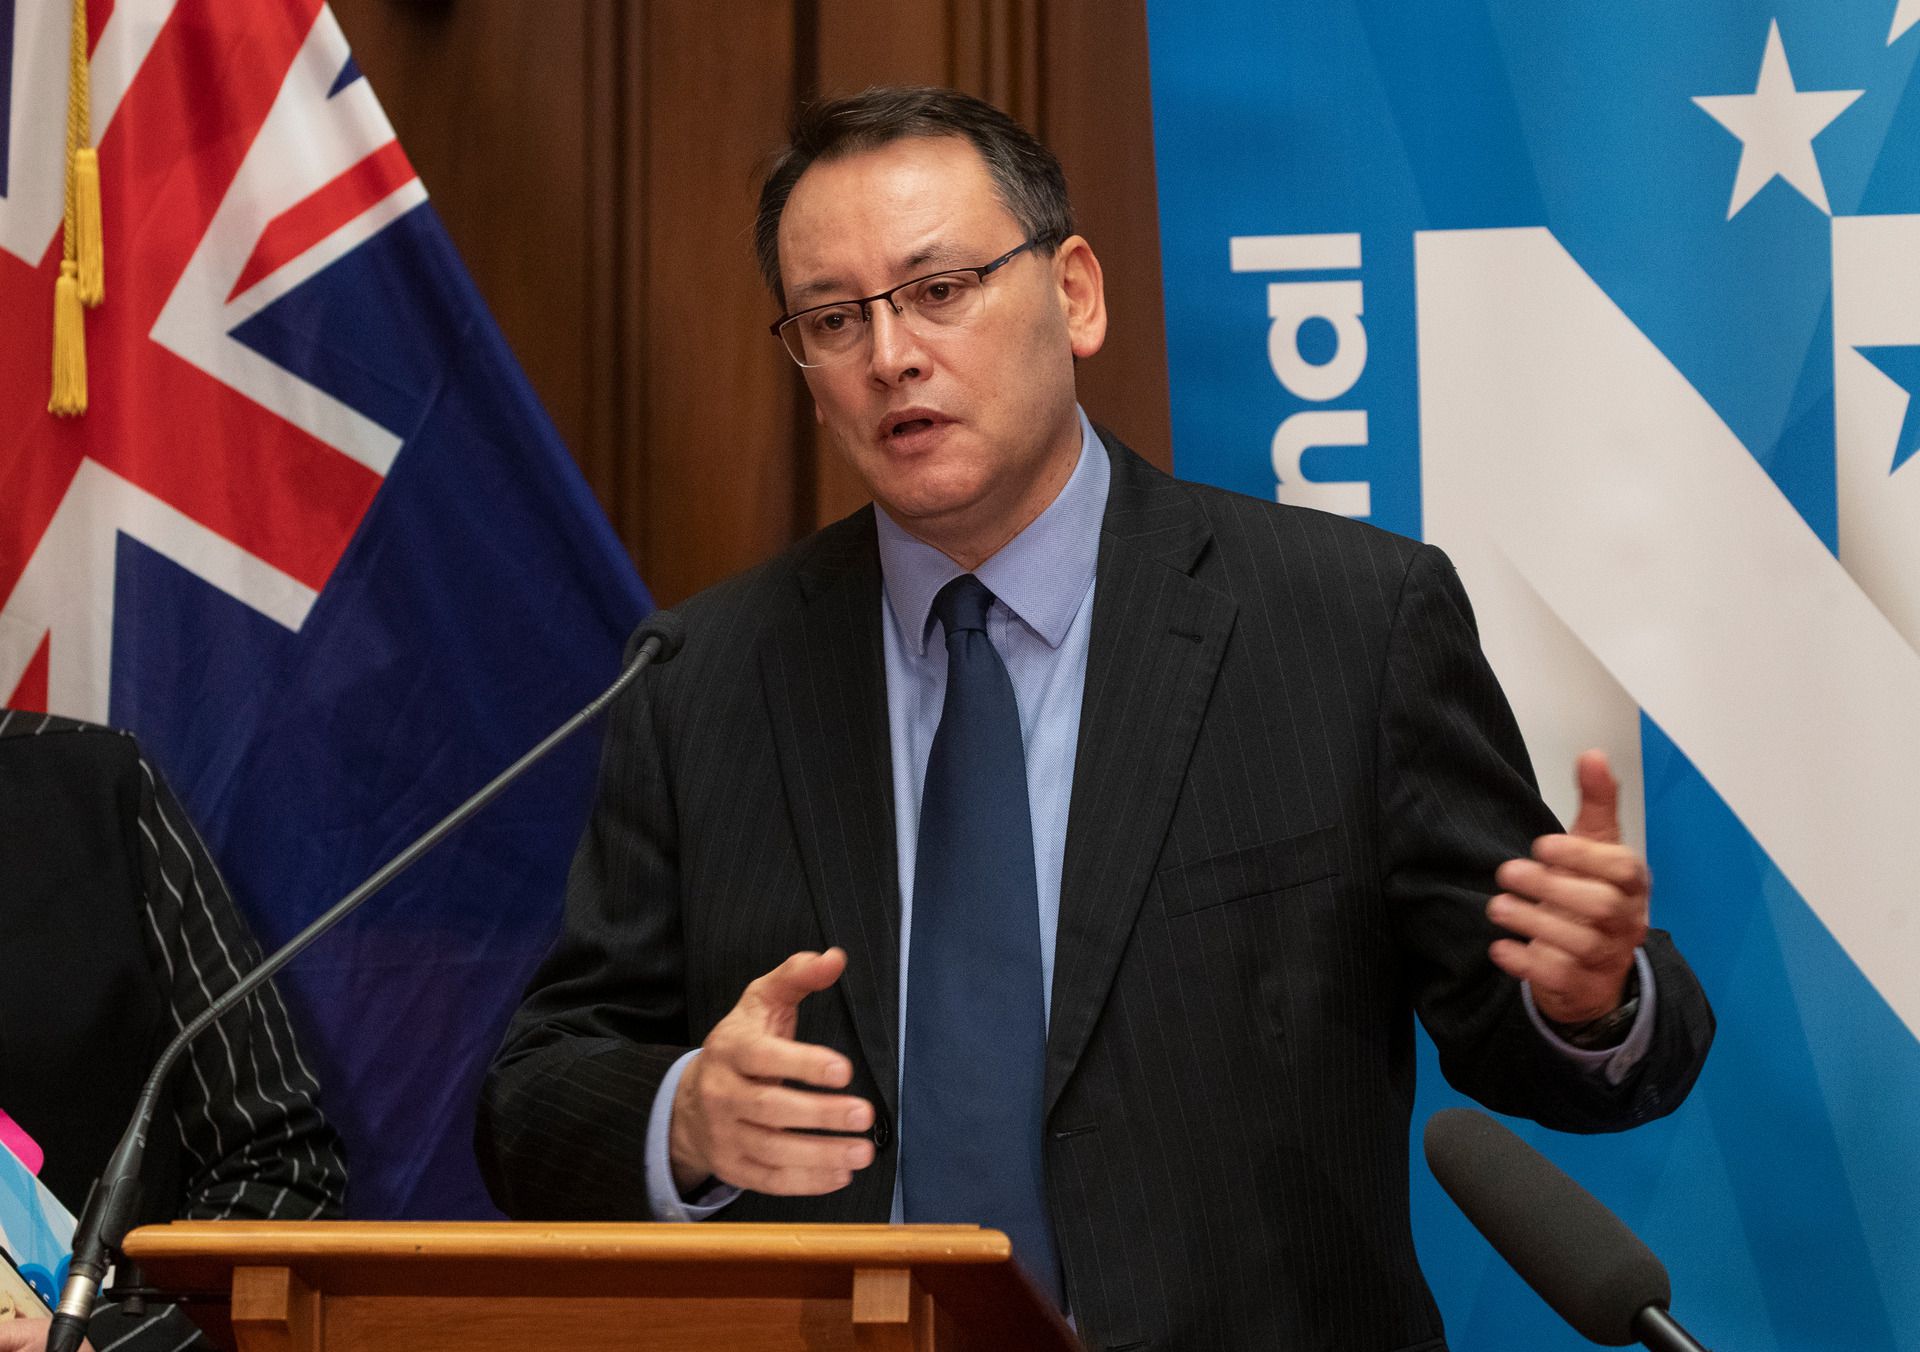 New health minister Shane Reti sets to work implementing the